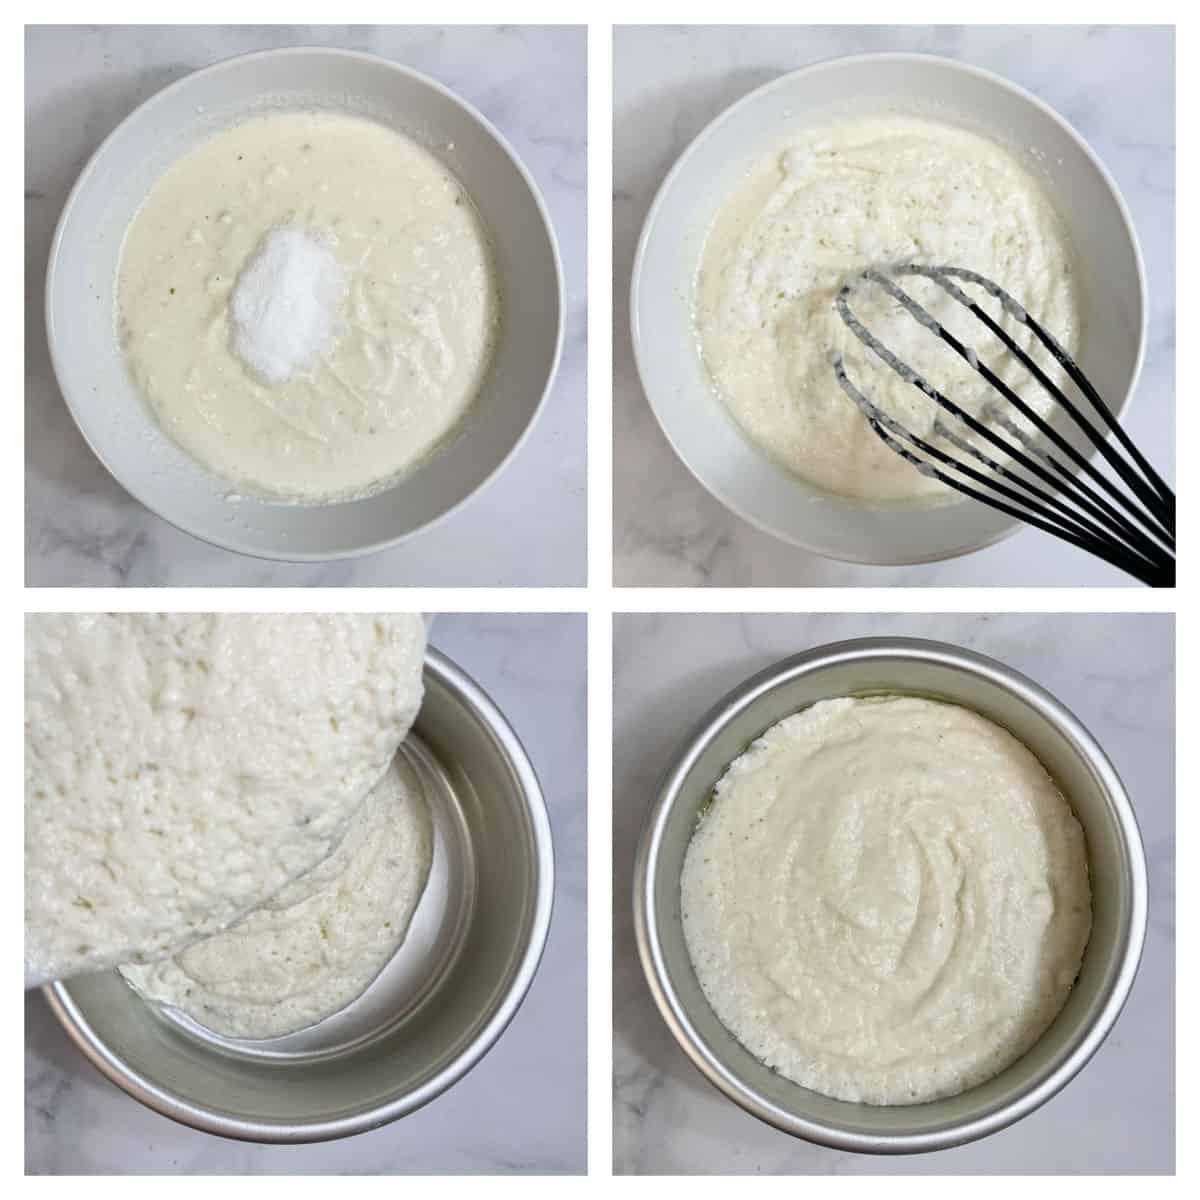 step to add the leavening agent like eno collage